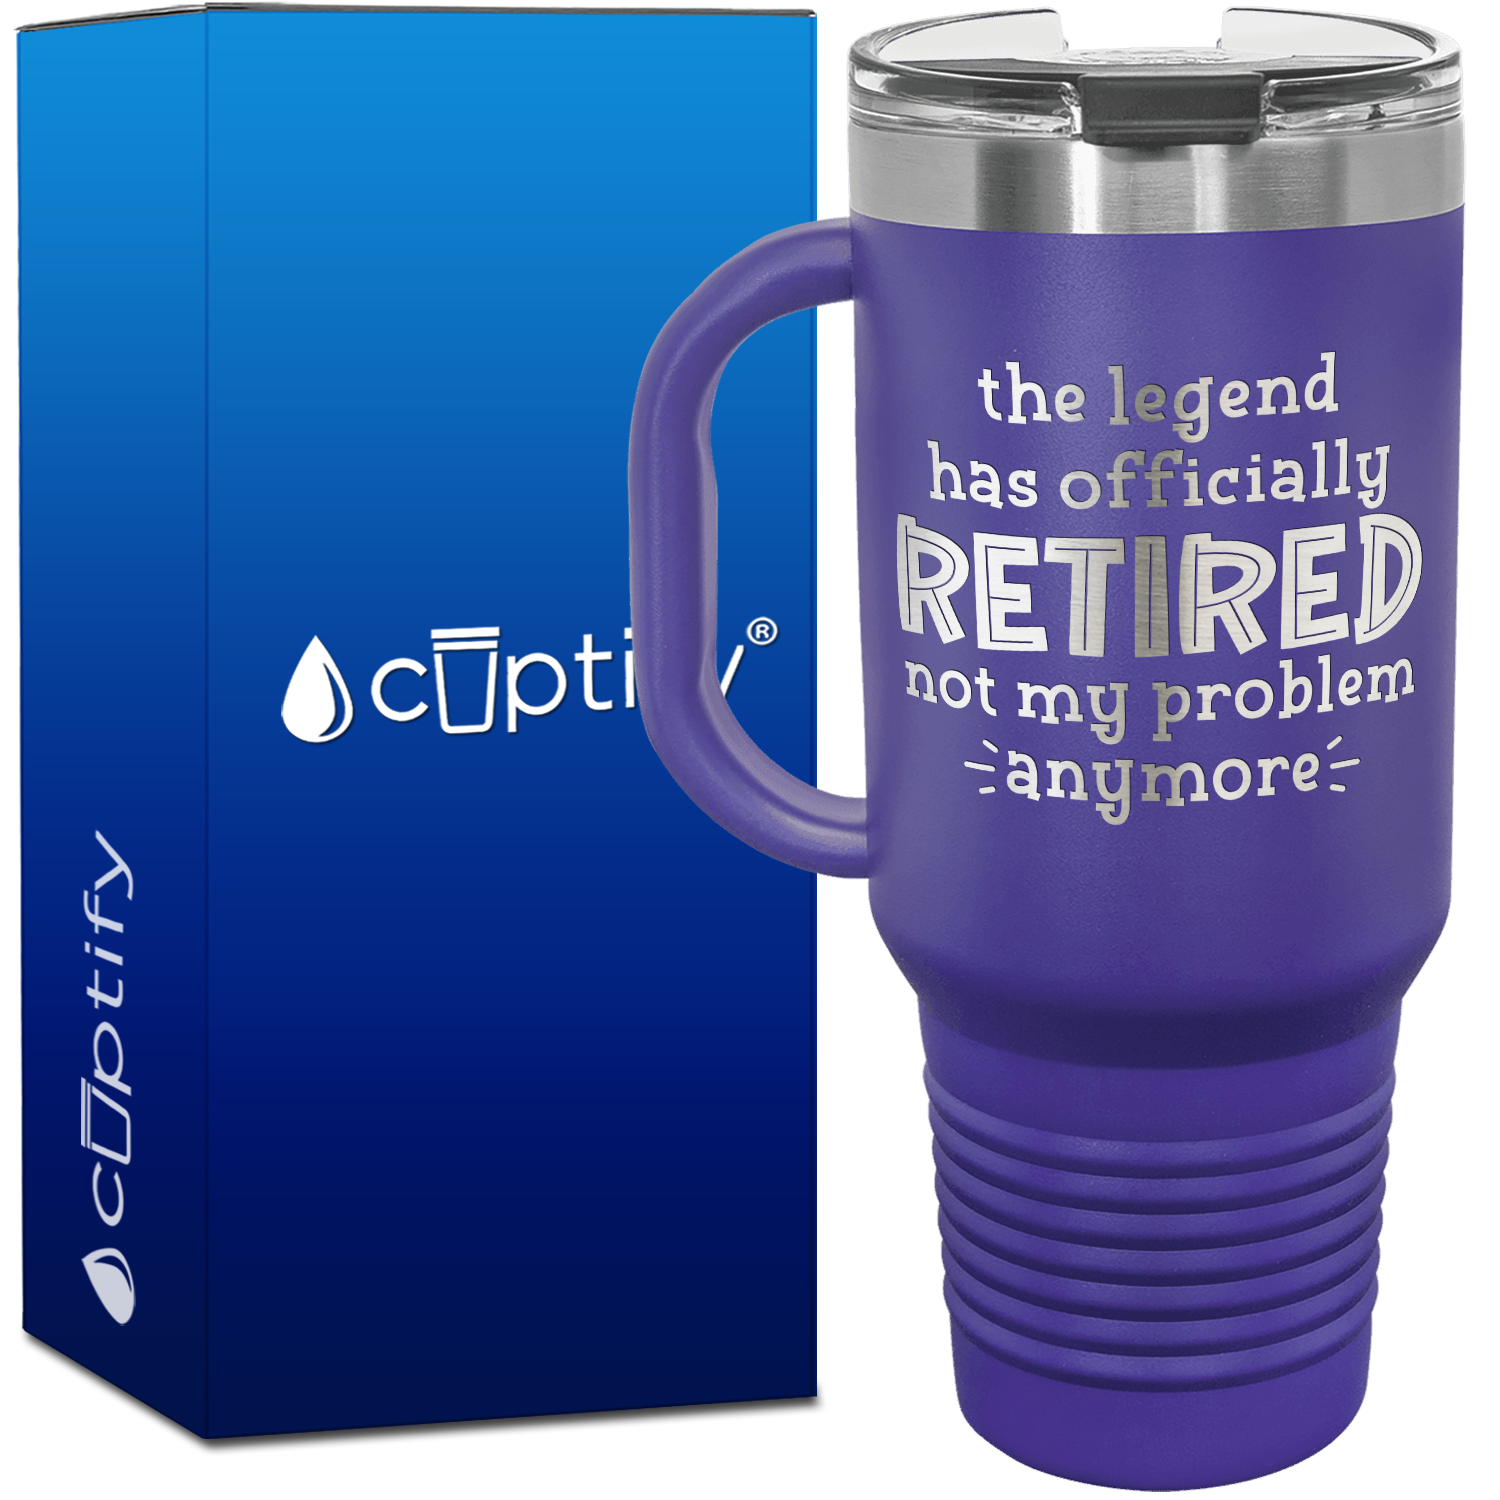 The Legend Has Officially Retired Not My Problem Anymore 40oz Retirement Travel Mug